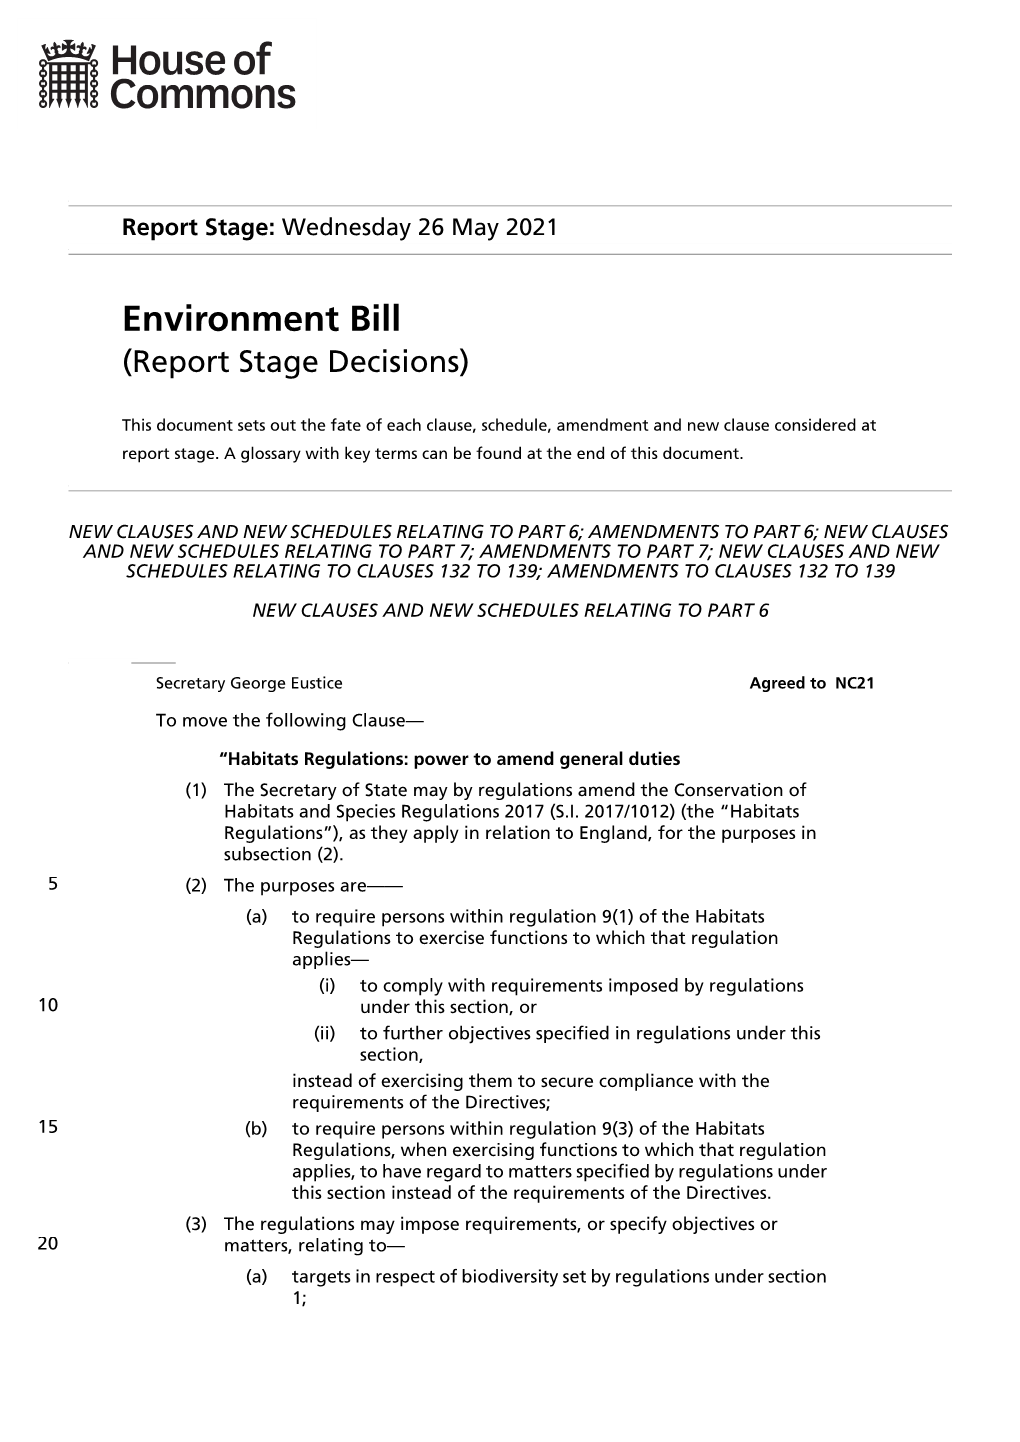 Environment Bill (Report Stage Decisions)